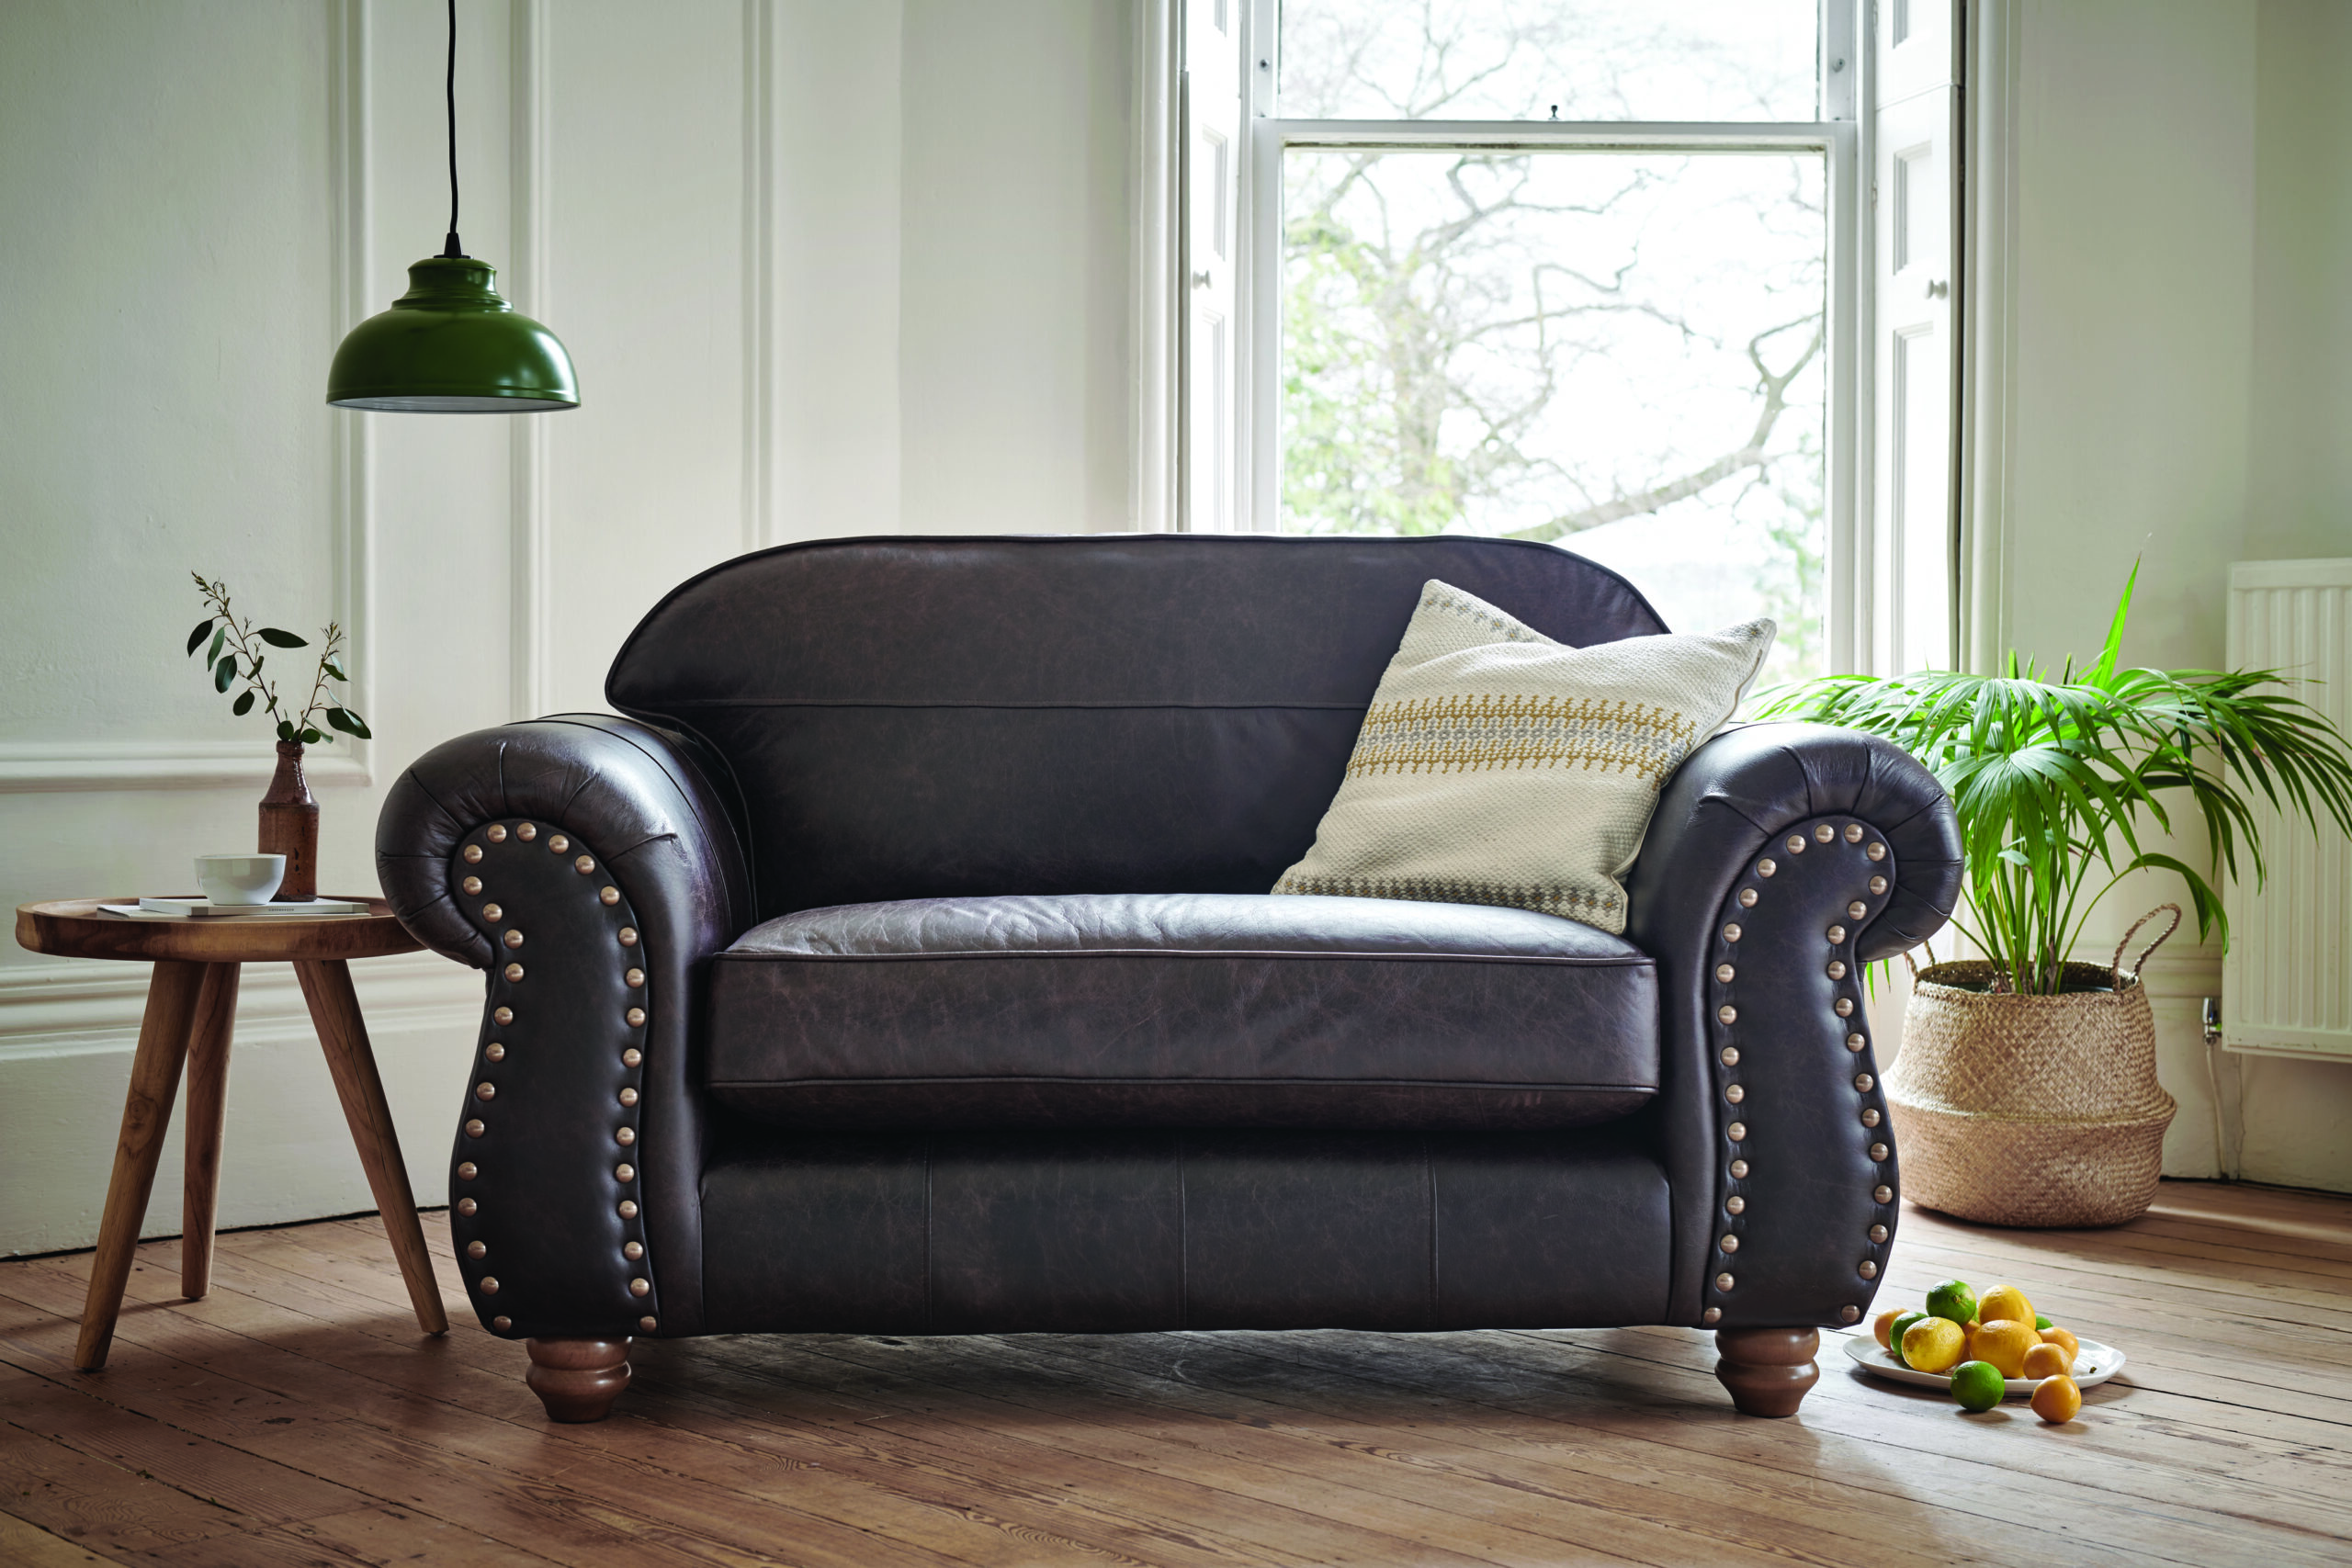 Tips To Keep Your Leather Sofa Looking